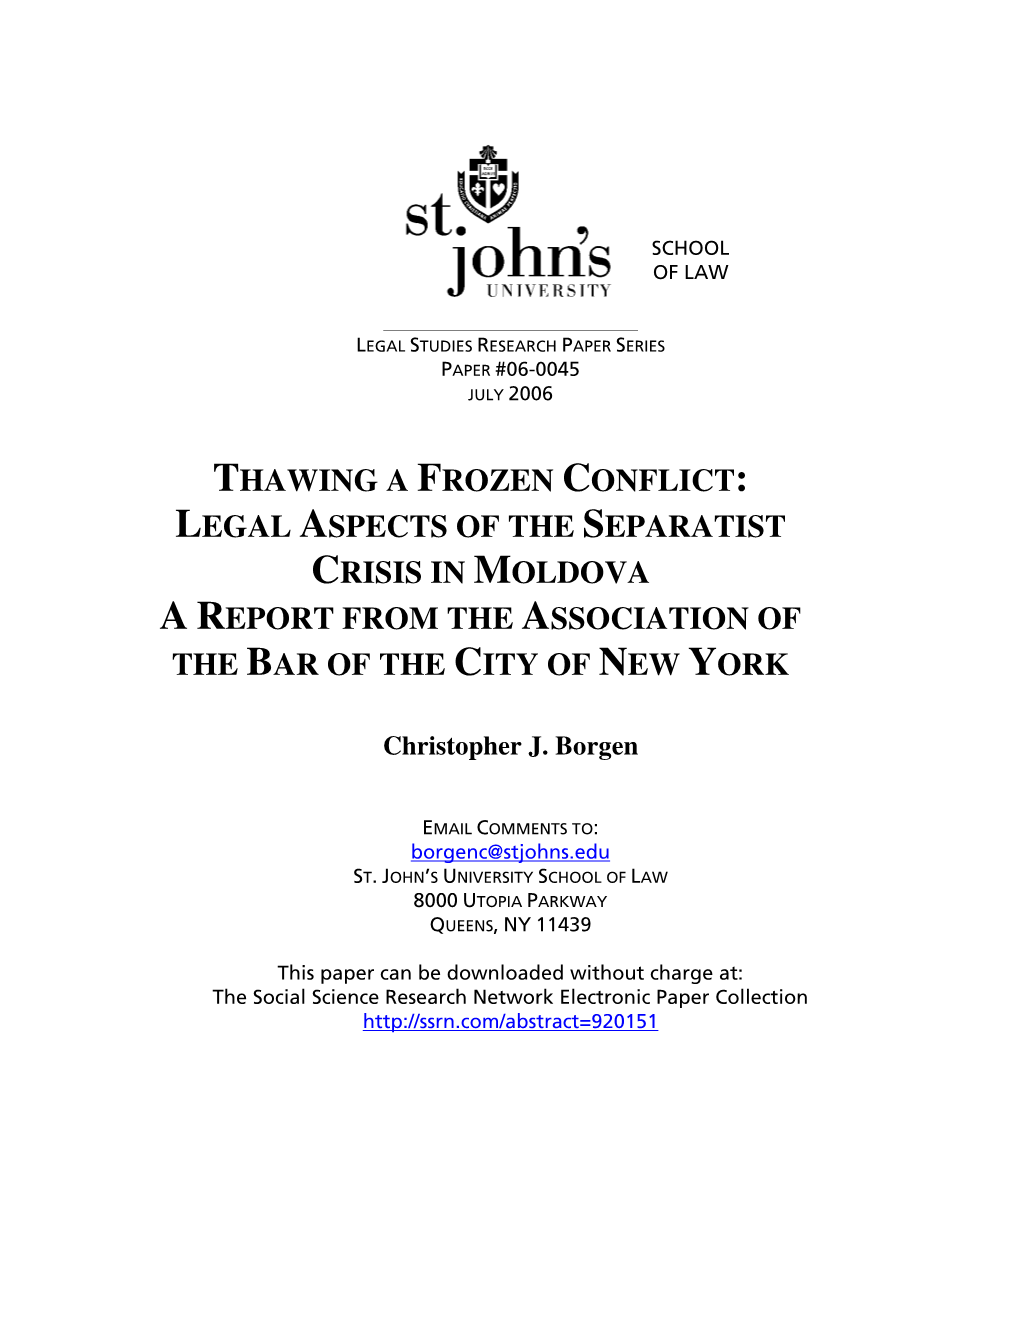 Thawing a Frozen Conflict: Legal Aspects of the Separatist Crisis in Moldova